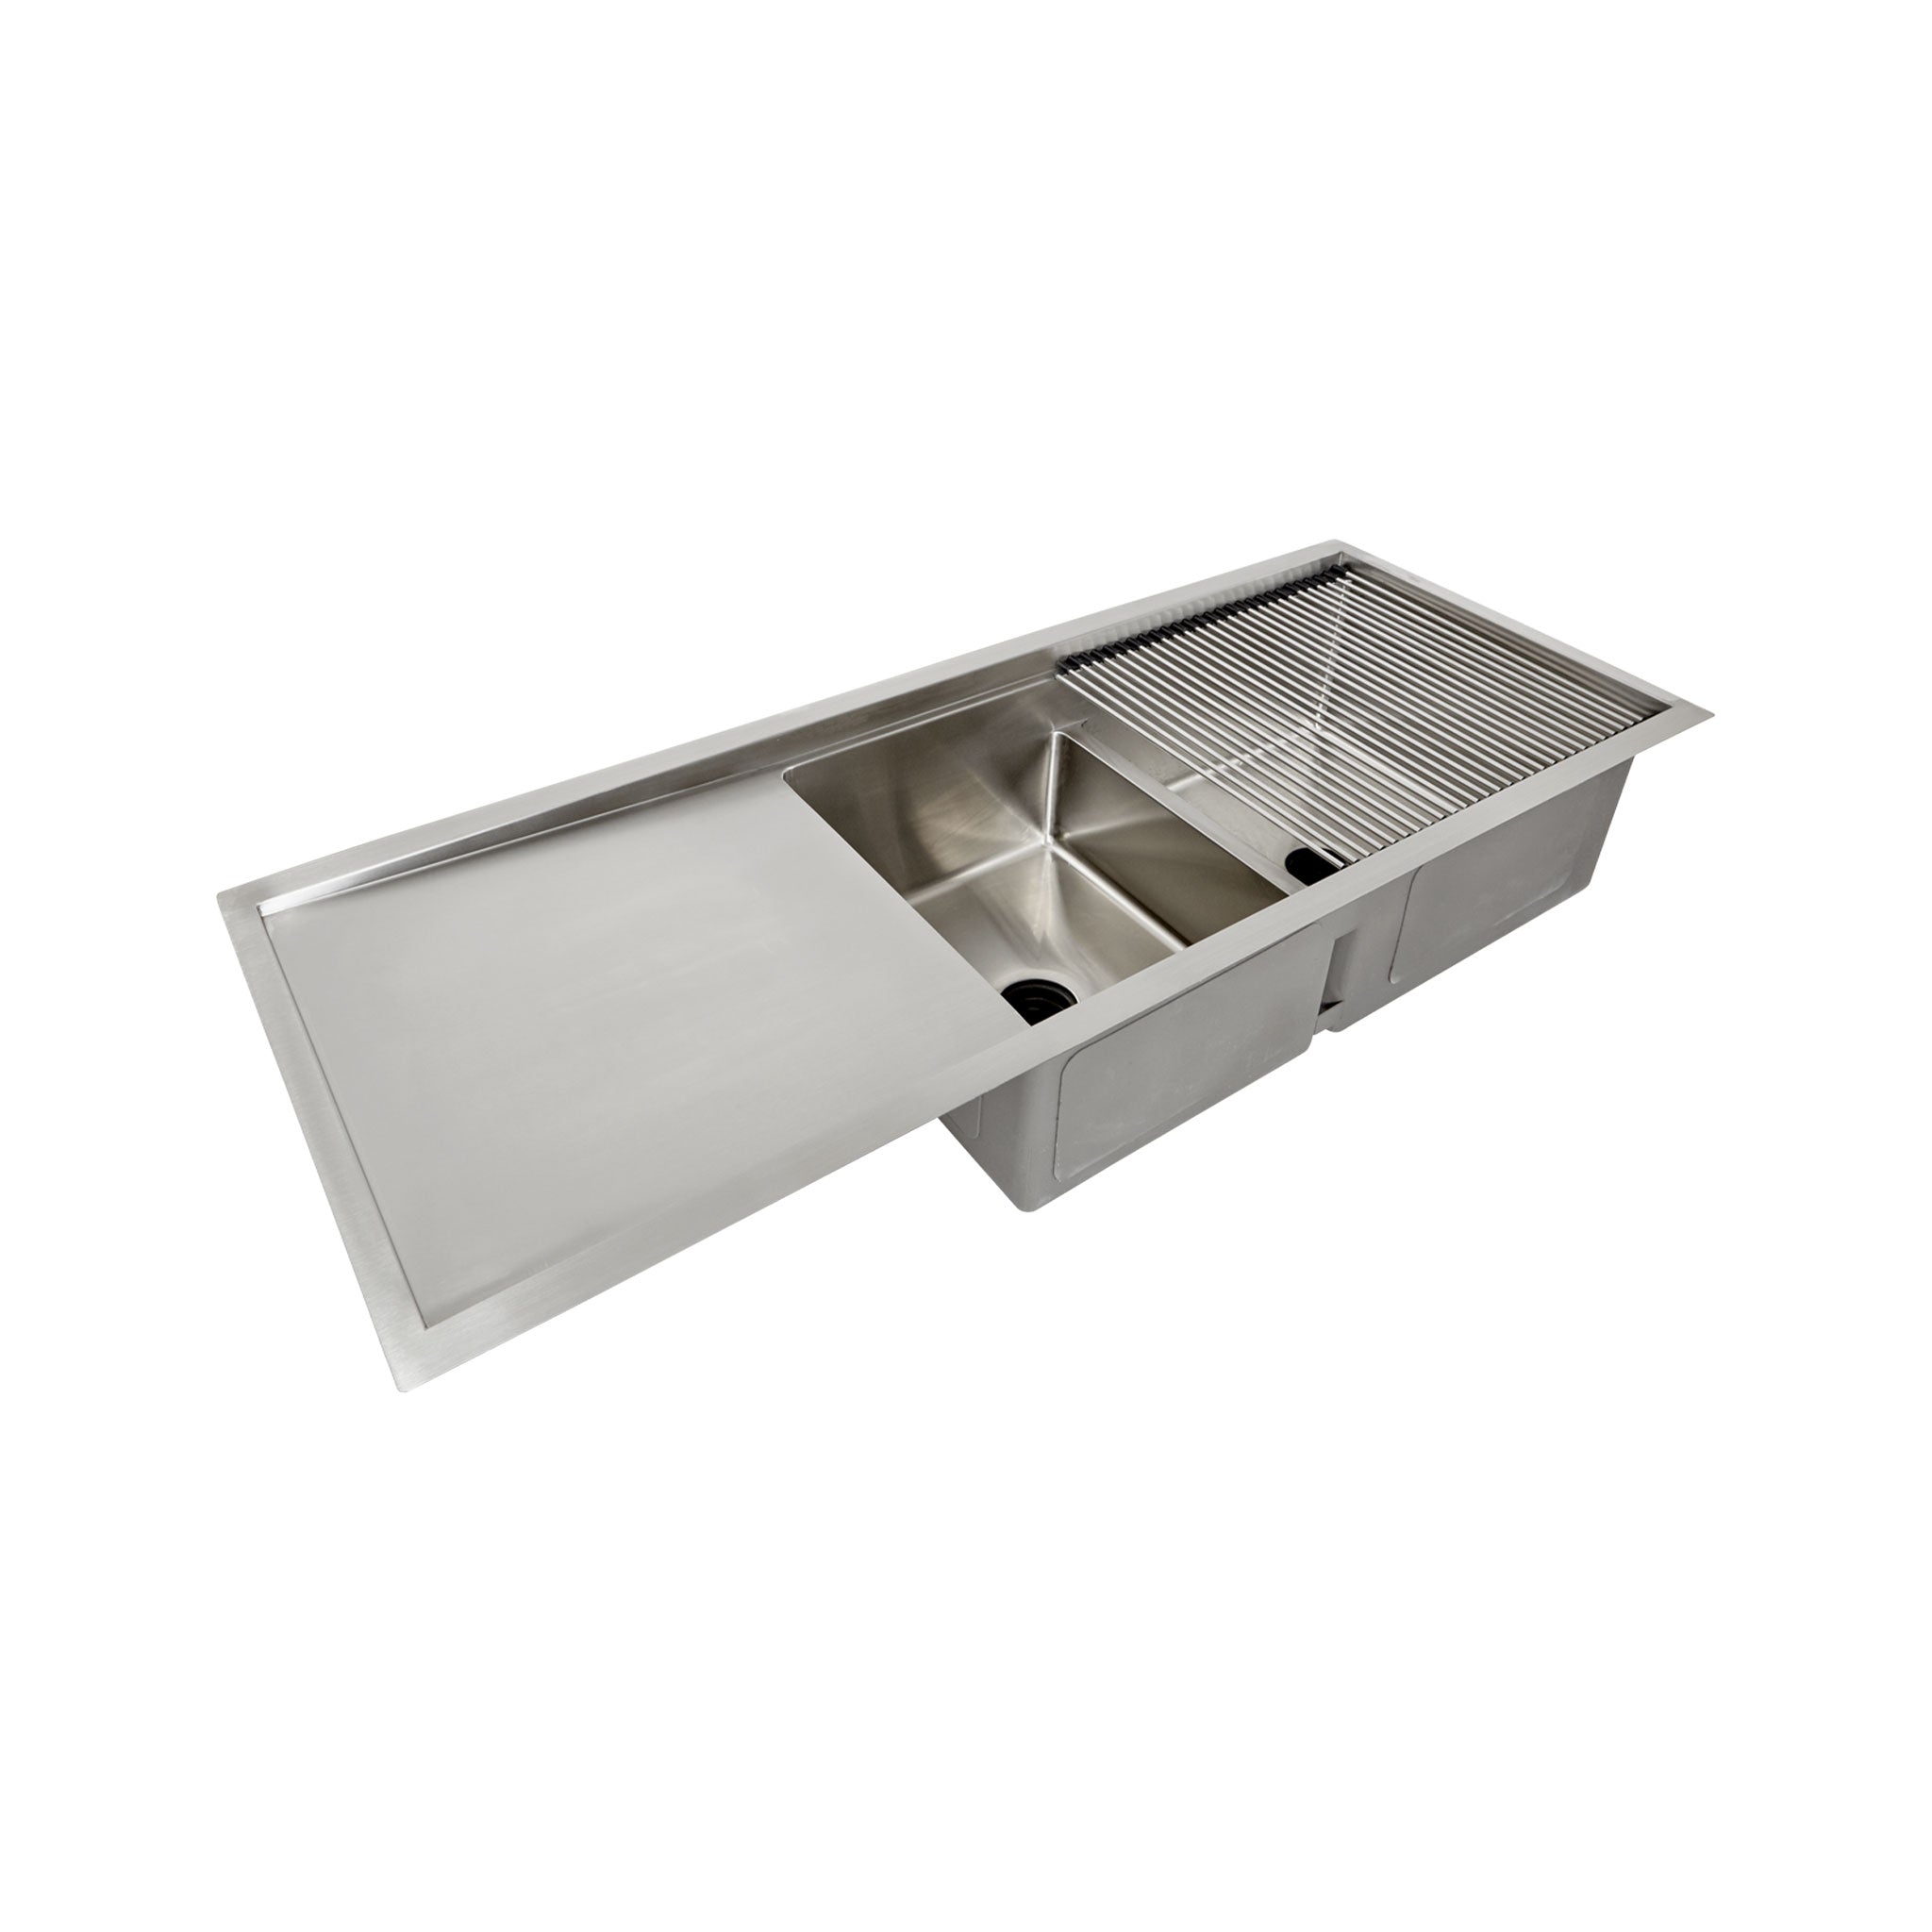 Custom accessories fitted to the workstation kitchen sink with drainboard and seamless drain